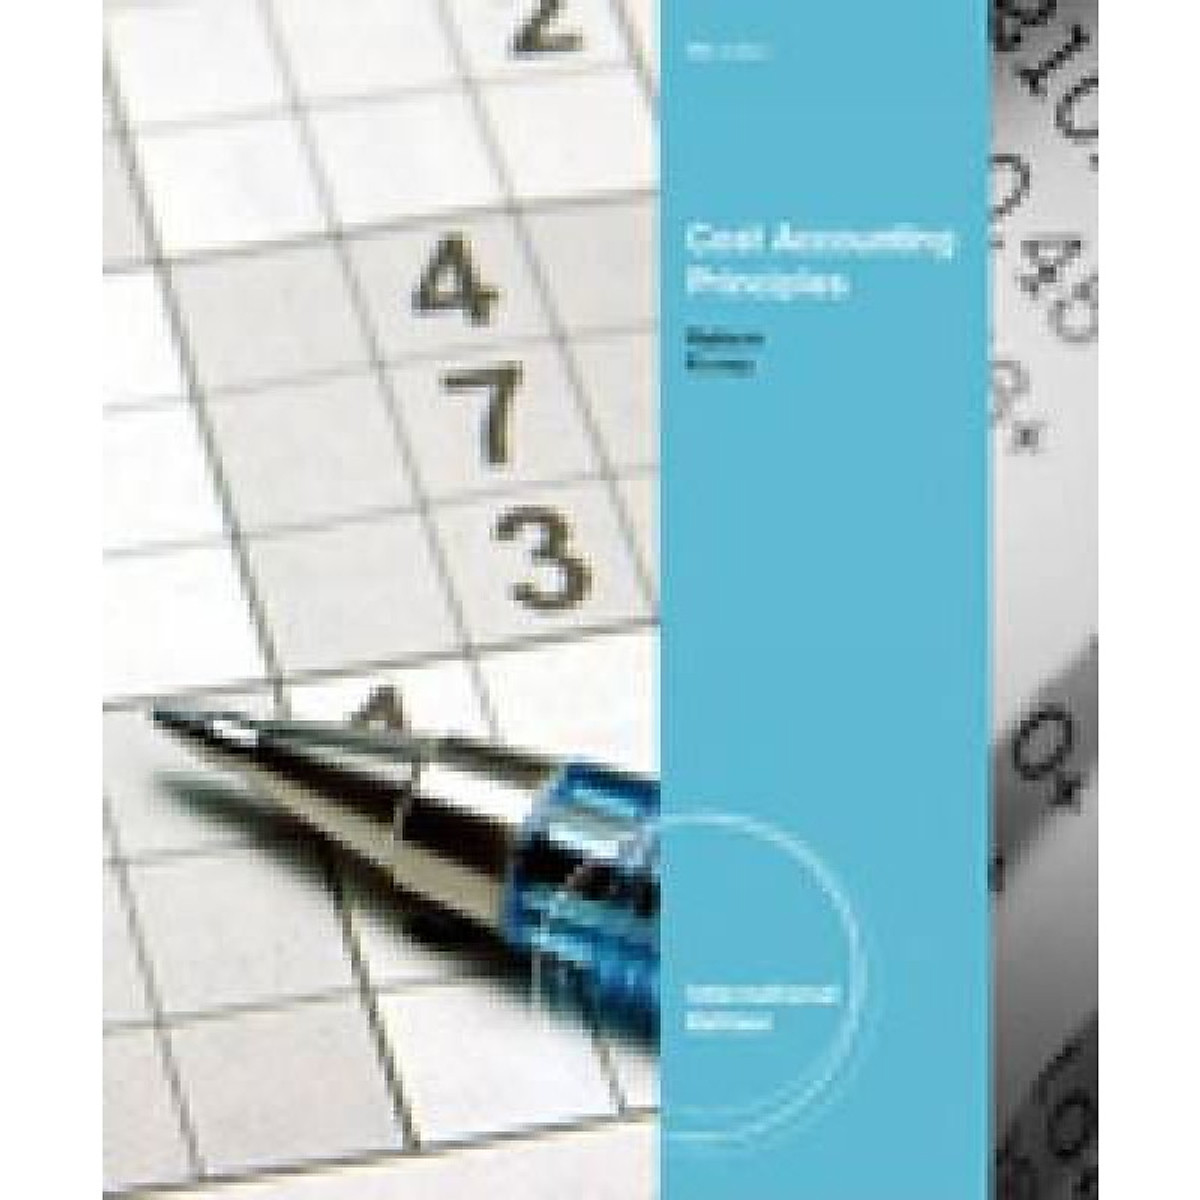 AISE Cost Accounting Principles